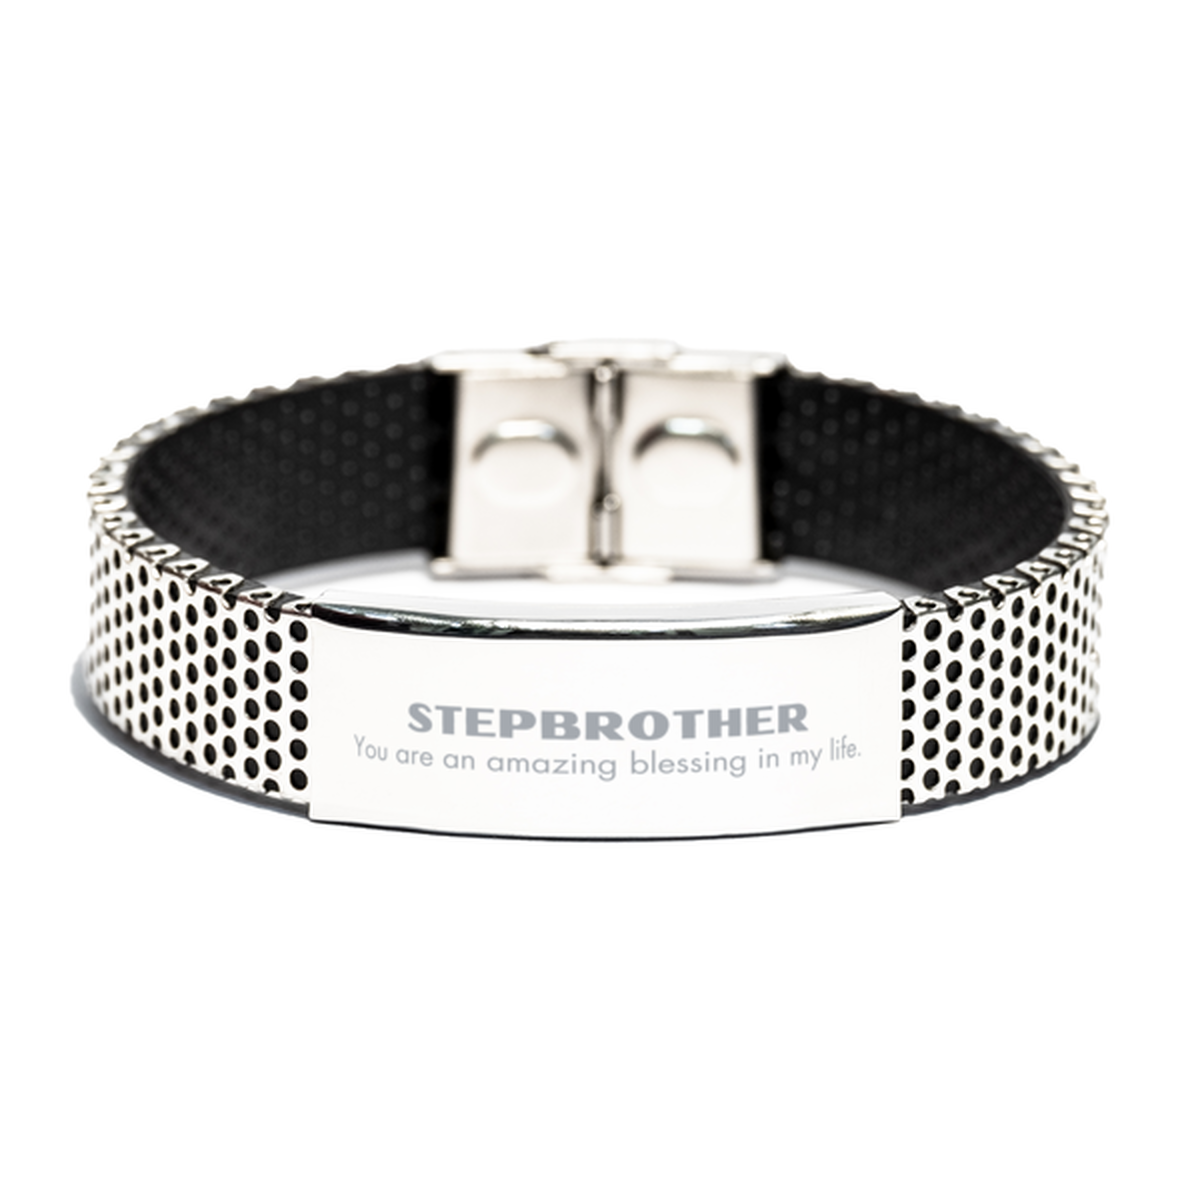 Stepbrother Stainless Steel Bracelet, You are an amazing blessing in my life, Thank You Gifts For Stepbrother, Inspirational Birthday Christmas Unique Gifts For Stepbrother